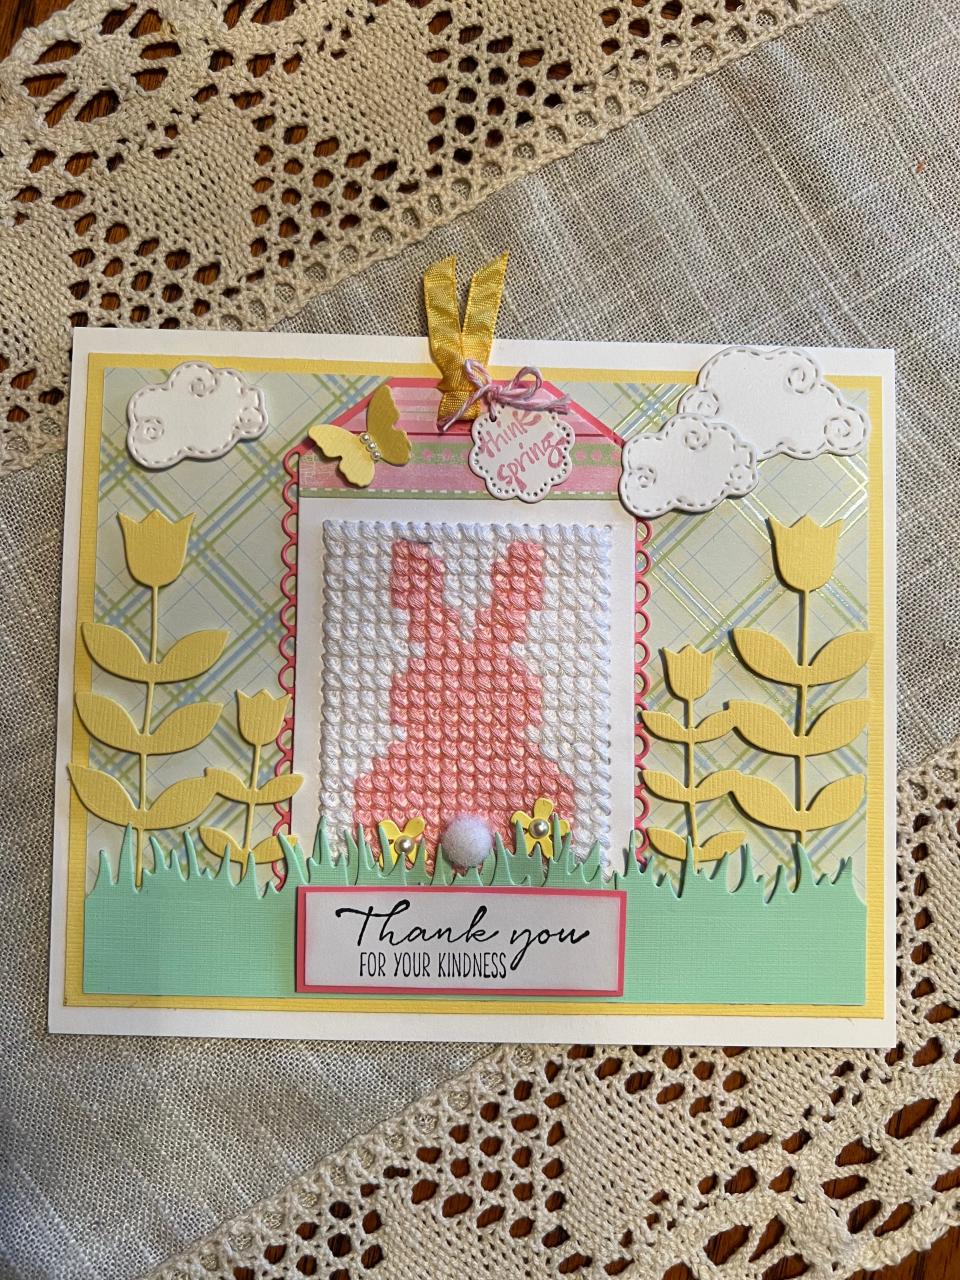 Pictured is the thank-you card Illinois grandmother Stacy Barkley mailed to her rescuer, Greg Spike. It features the bunny cross-stitch design Barkley was crafting at the time of the fire Spike helped her escape in Eugene, Oregon, on Feb. 28, 2023.